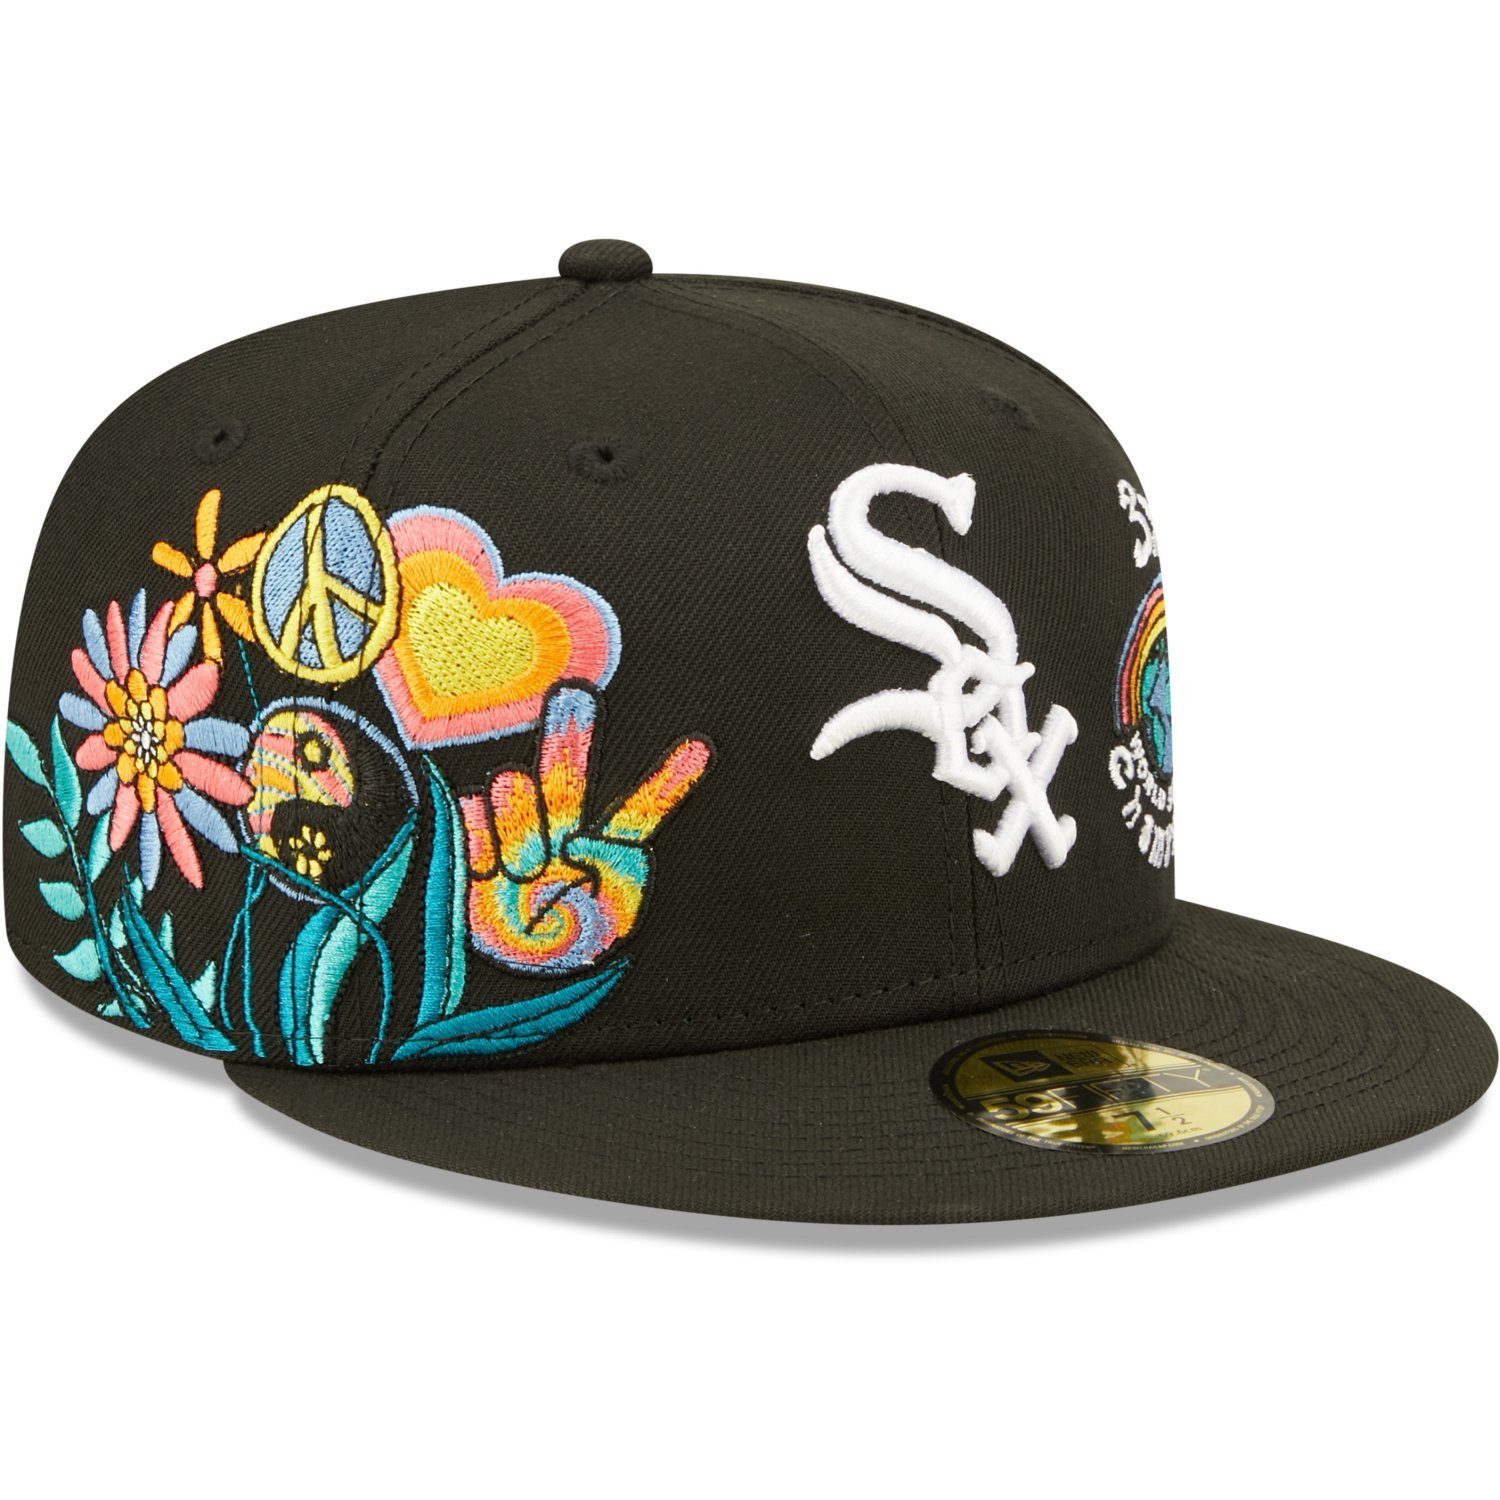 New Era Fitted Cap 59Fifty GROOVY Chicago White Sox | Fitted Caps